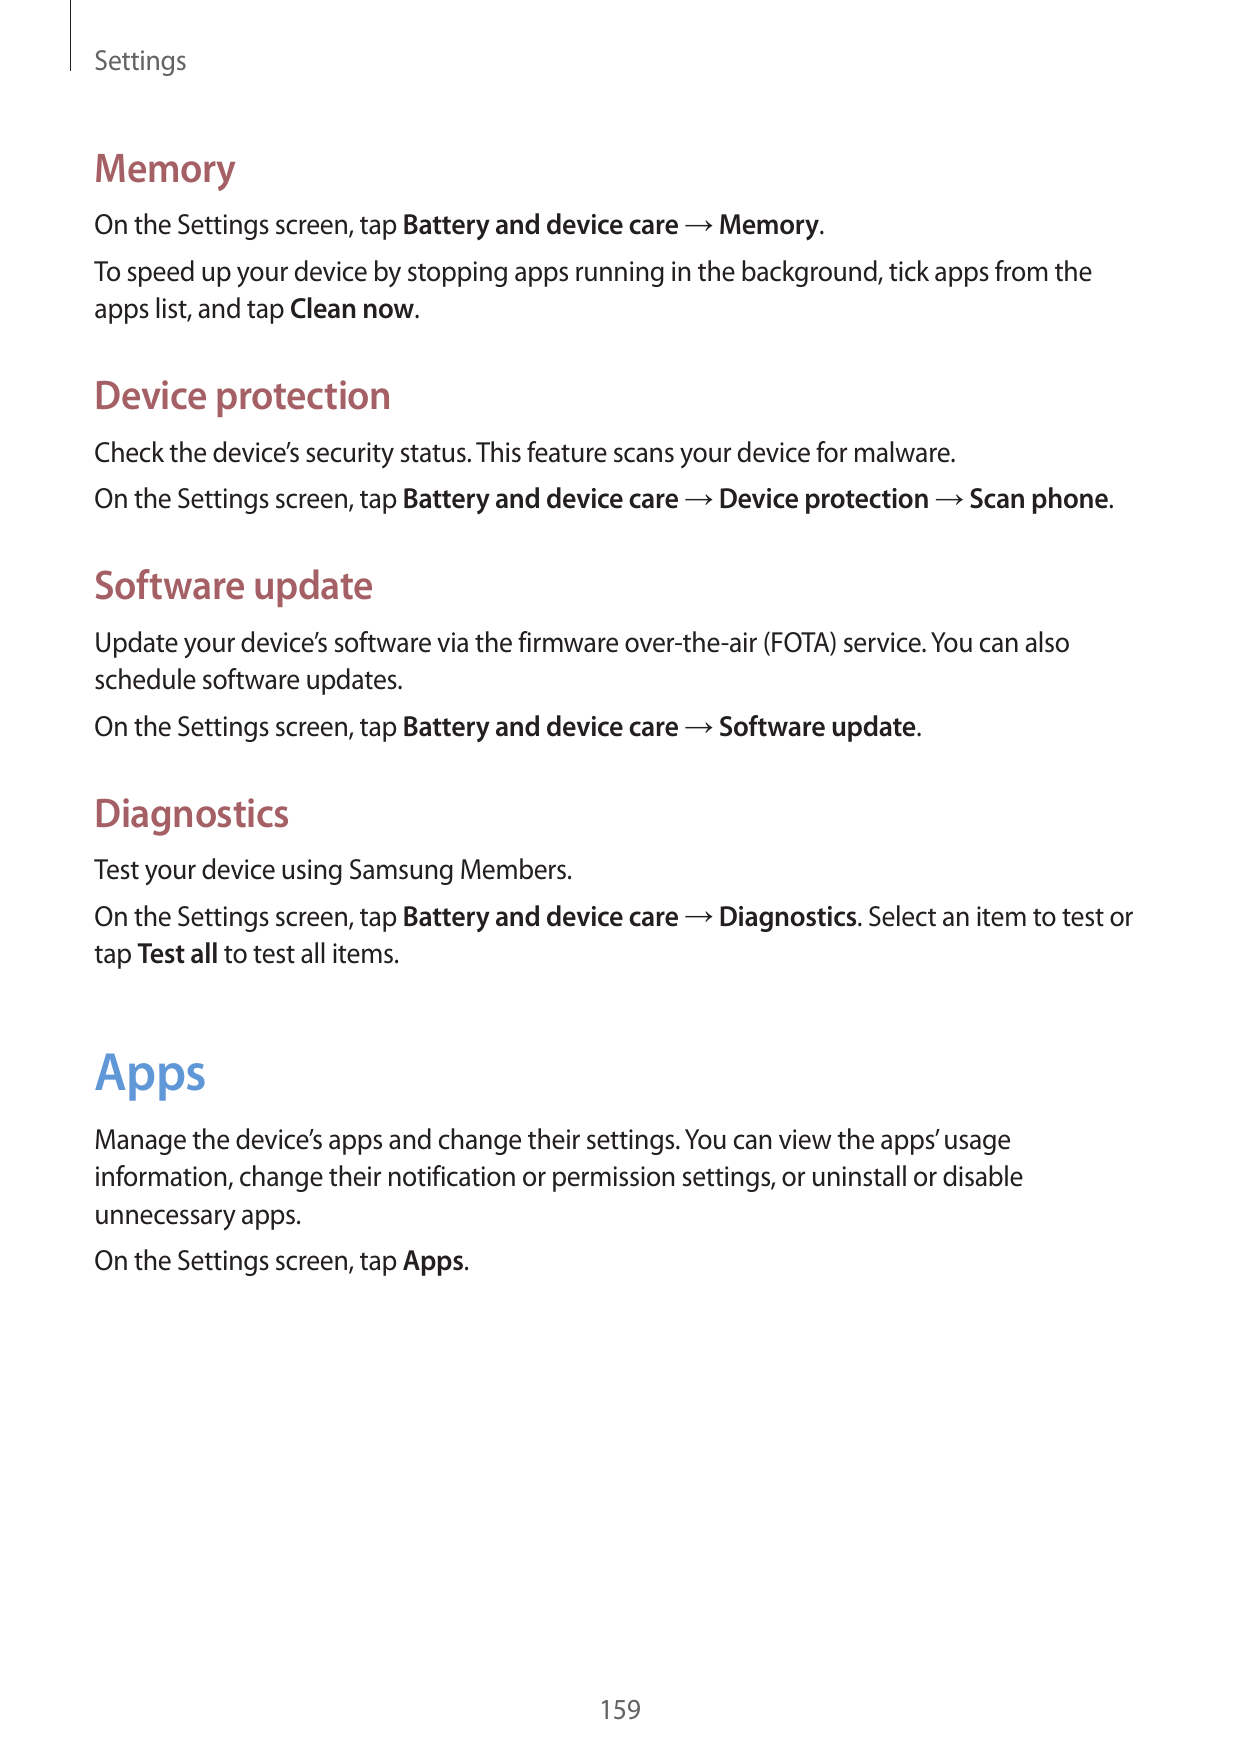 SettingsMemoryOn the Settings screen, tap Battery and device care → Memory.To speed up your device by stopping apps running in t